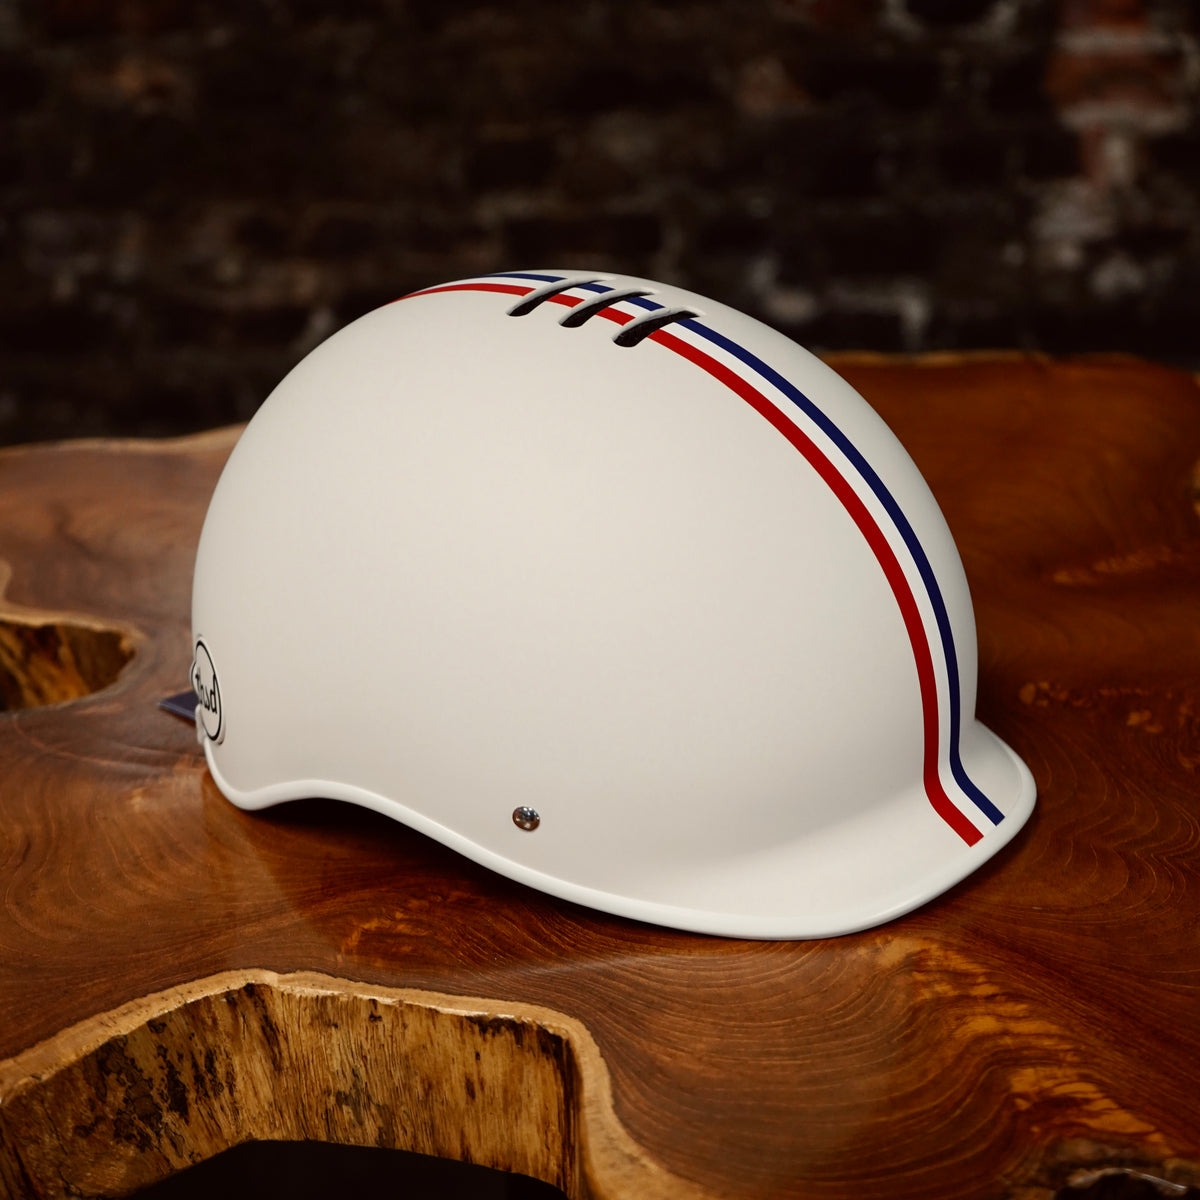 Classic Heritage Helmet Collection  - Thousand